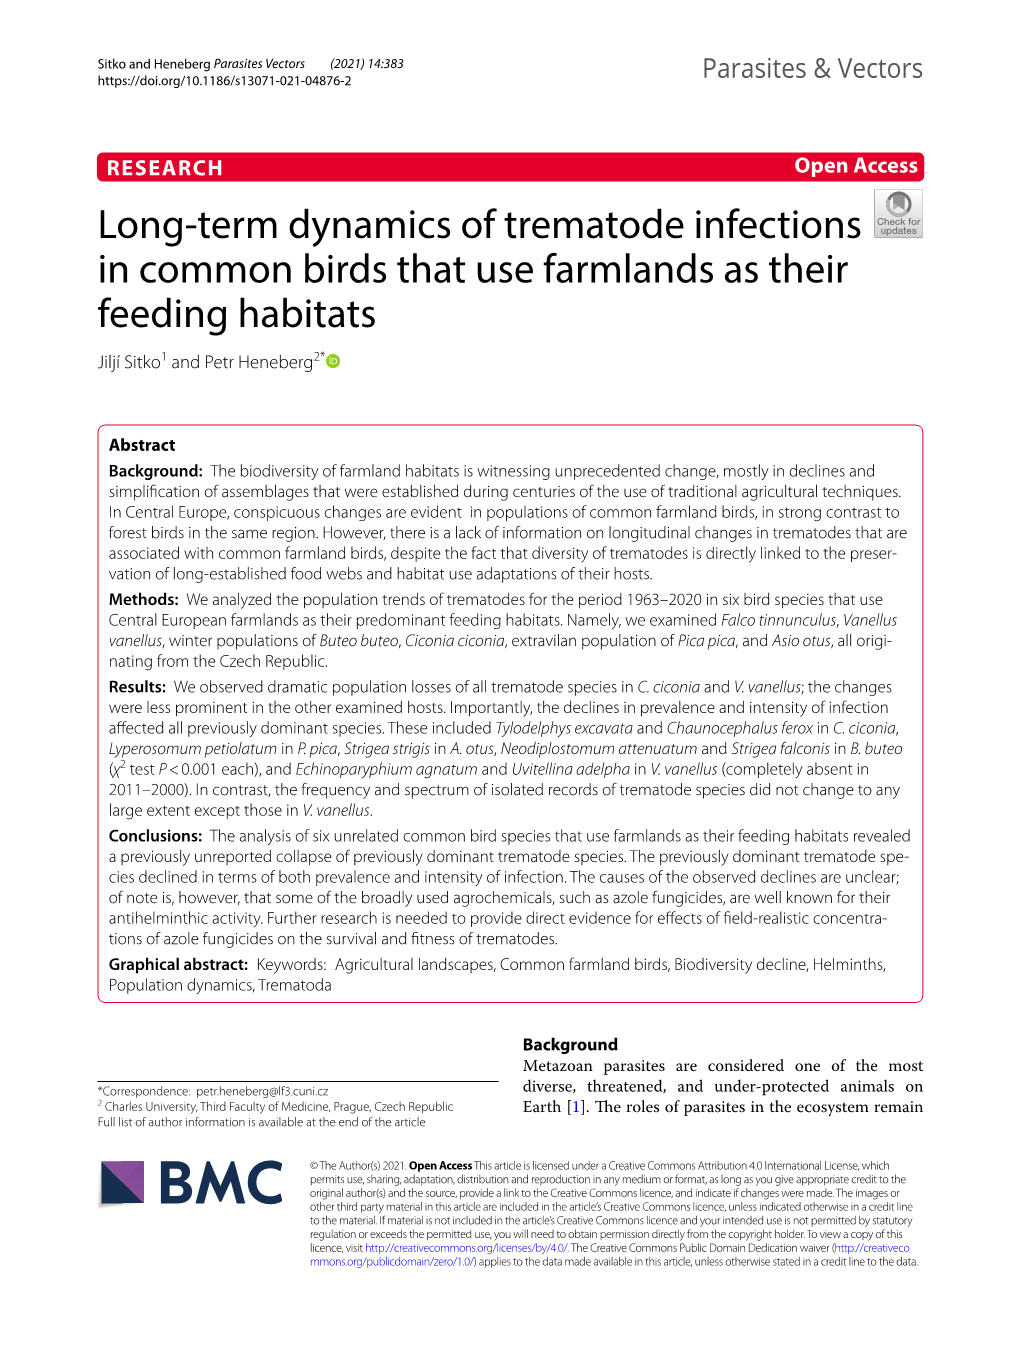 Long-Term Dynamics of Trematode Infections in Common Birds That Use